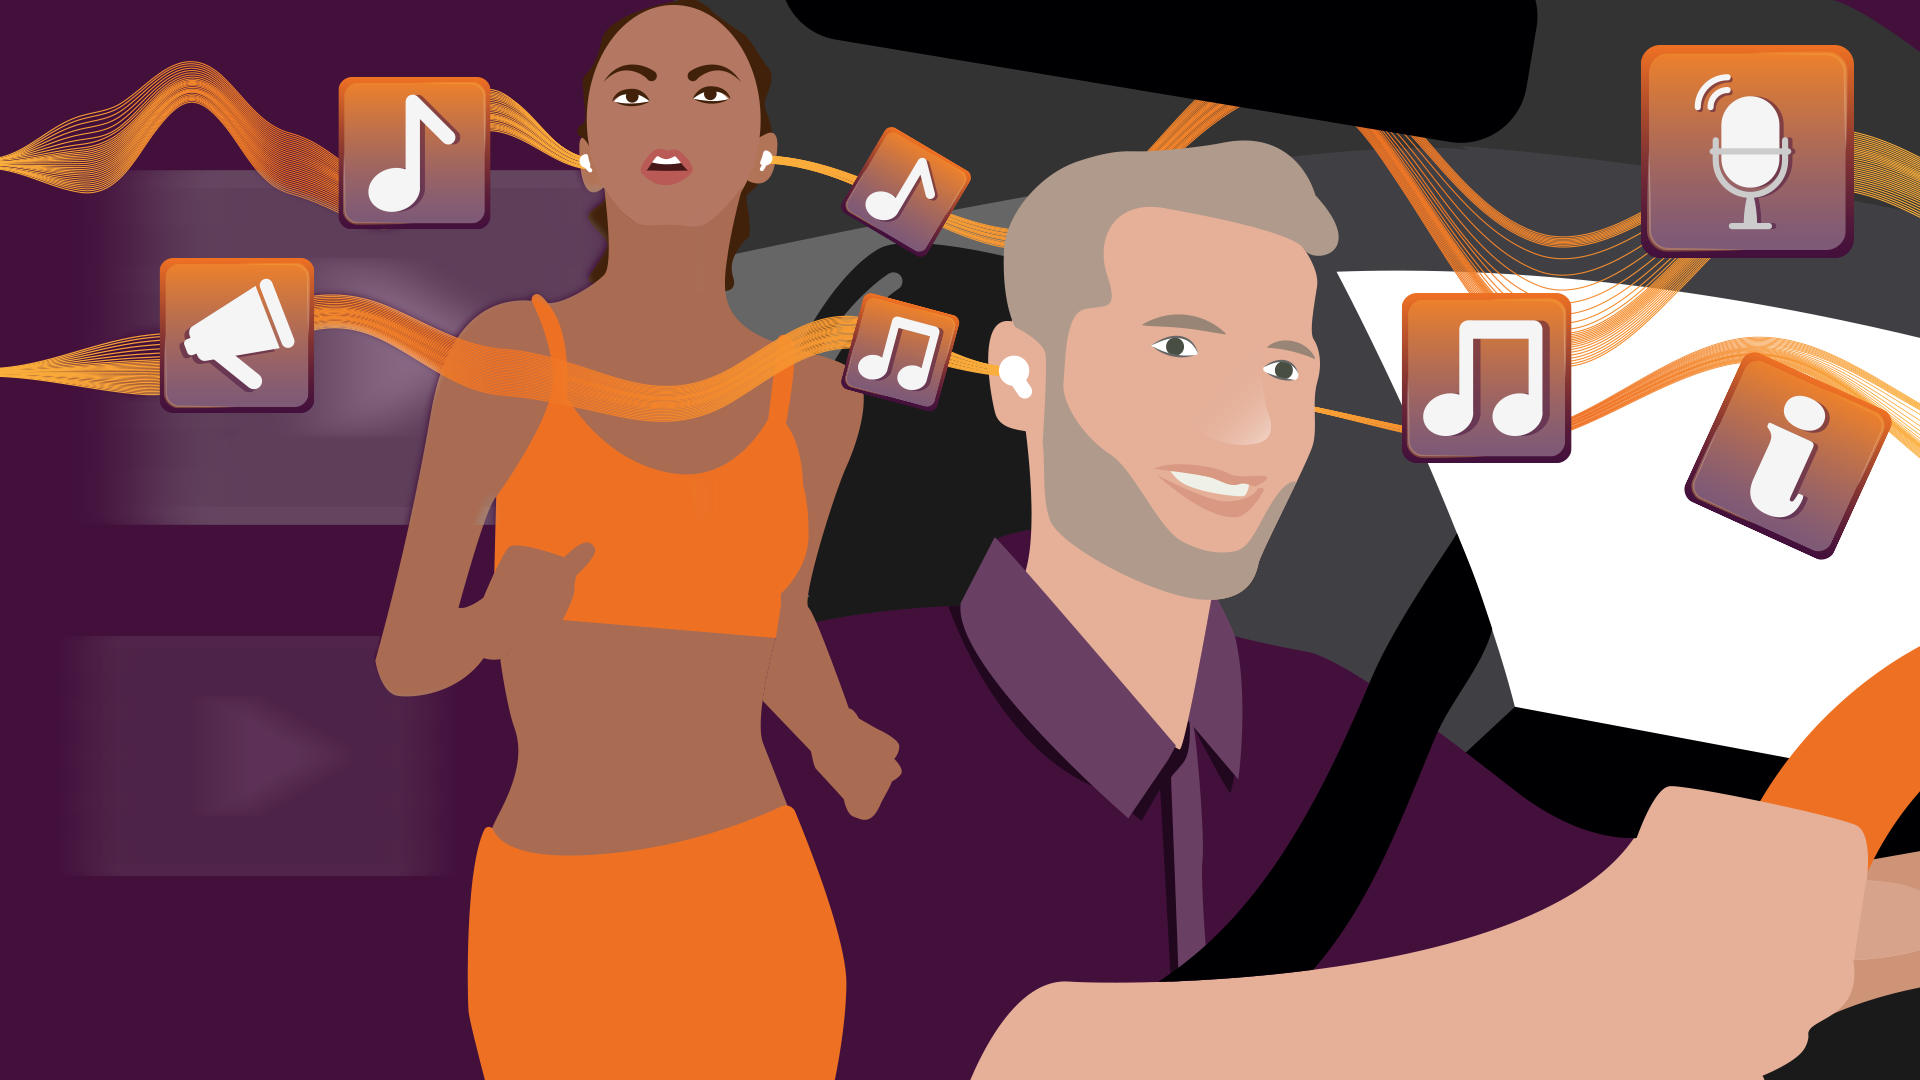 illustration of Busy people consuming audio content